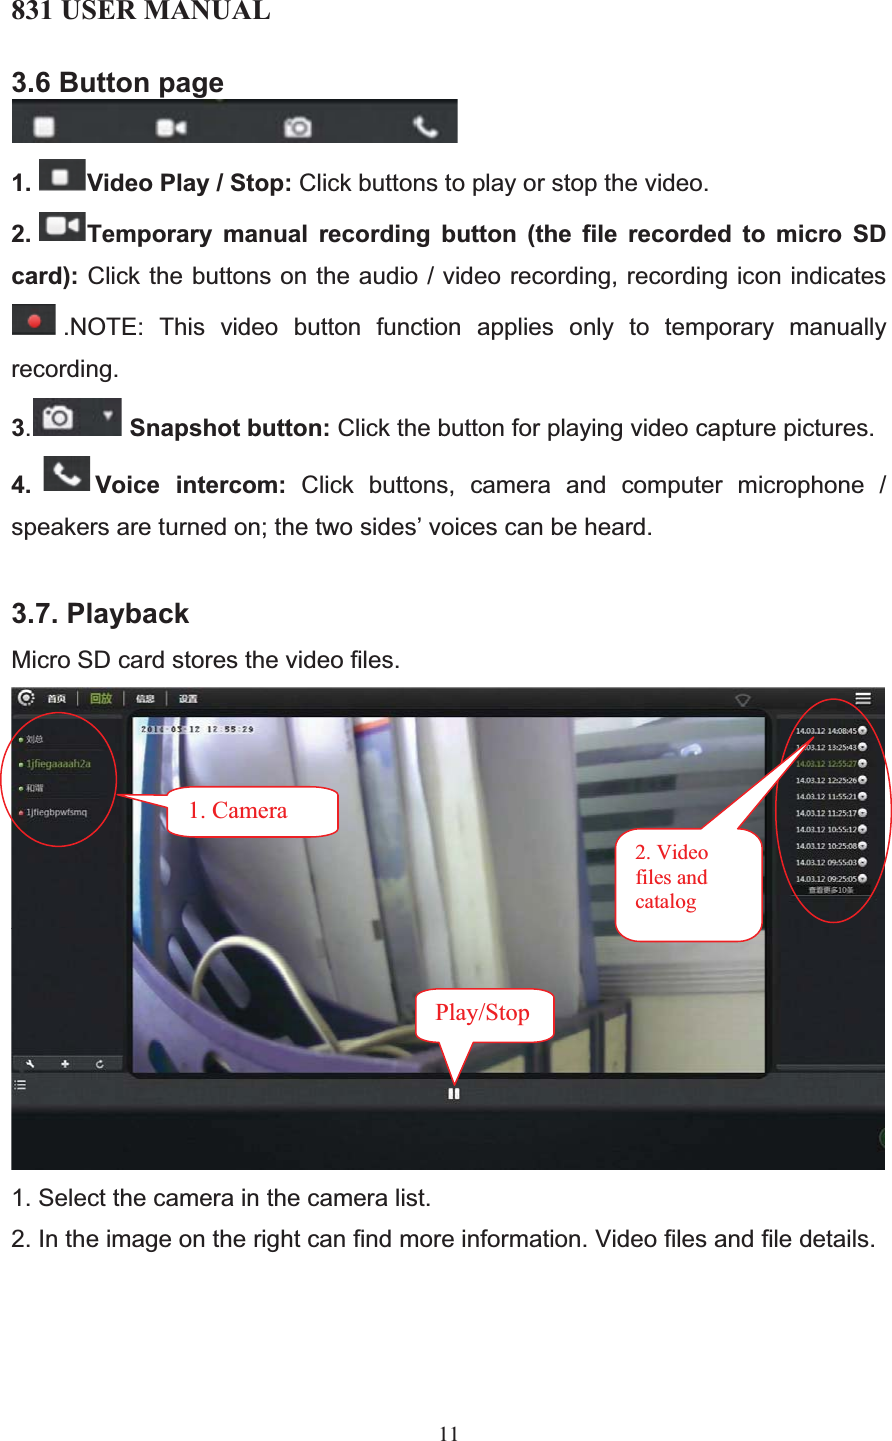 831 USER MANUAL 11 3.6 Button page 1. Video Play / Stop: Click buttons to play or stop the video. 2. Temporary manual recording button (the file recorded to micro SD card): Click the buttons on the audio / video recording, recording icon indicates .NOTE: This video button function applies only to temporary manually recording. 3.Snapshot button: Click the button for playing video capture pictures. 4. Voice intercom: Click buttons, camera and computer microphone / speakers are turned on; the two sides’ voices can be heard. 3.7. Playback Micro SD card stores the video files.  1. Select the camera in the camera list. 2. In the image on the right can find more information. Video files and file details.       2. Video files and catalog 1. Camera Play/Stop 